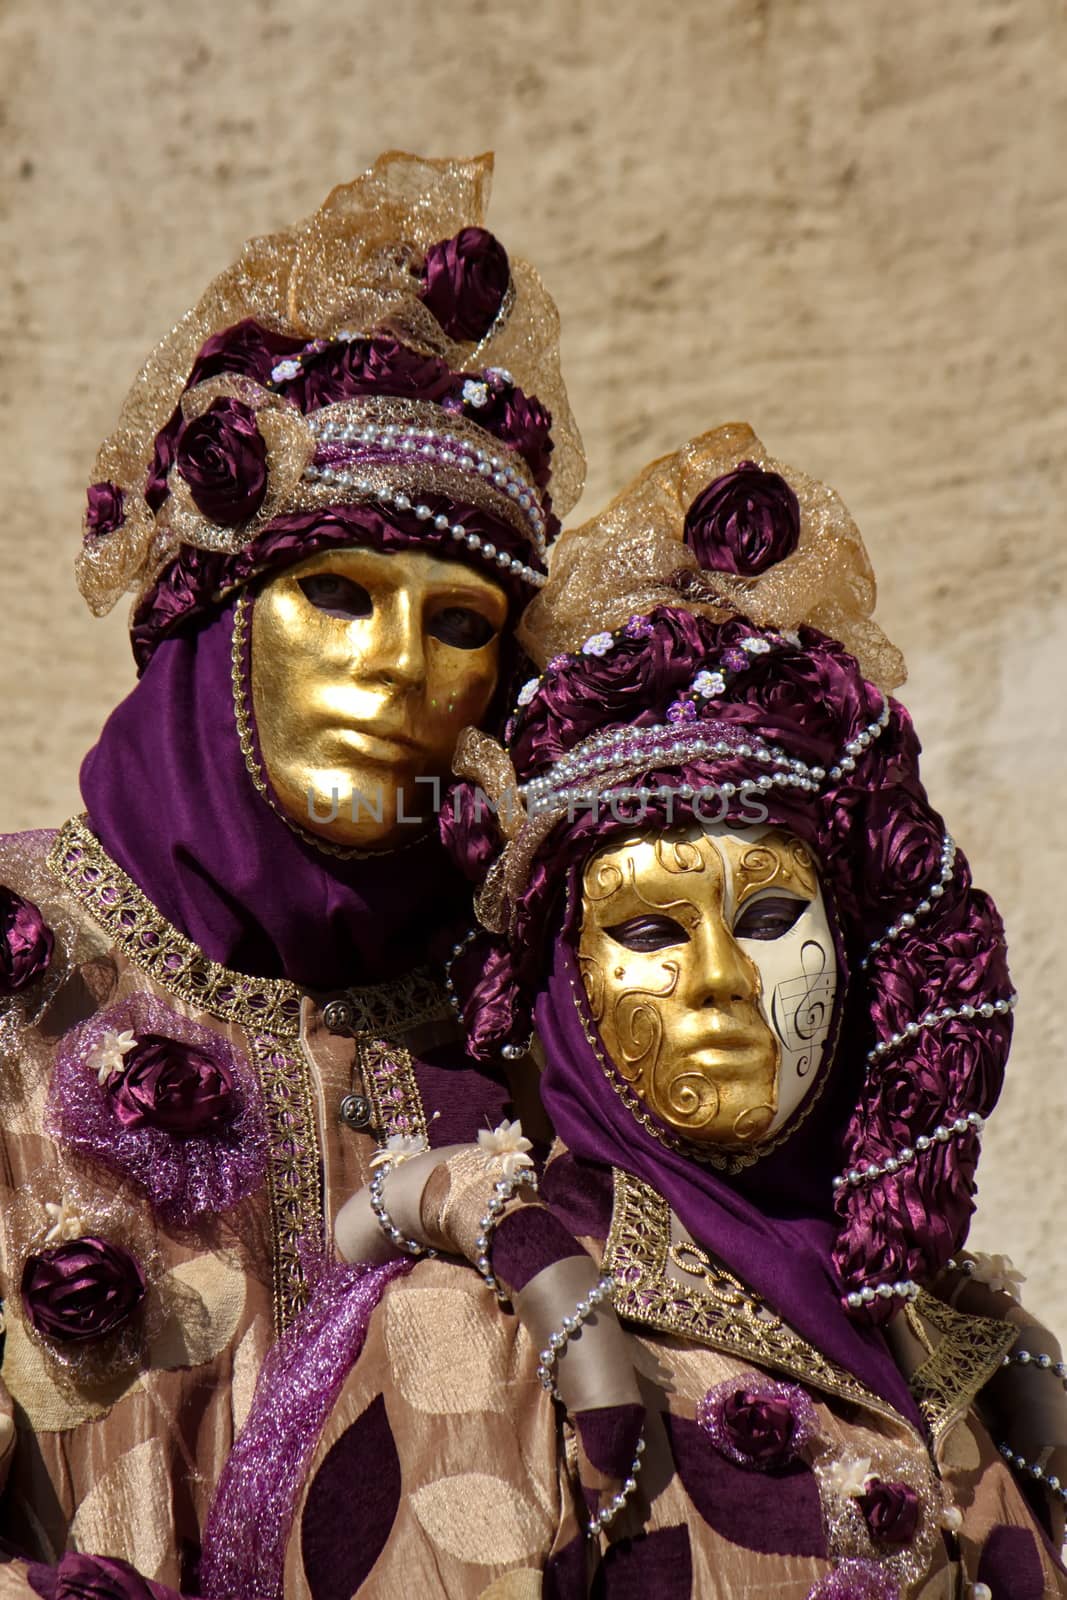 Venetian carnival at Annecy, France by Elenaphotos21